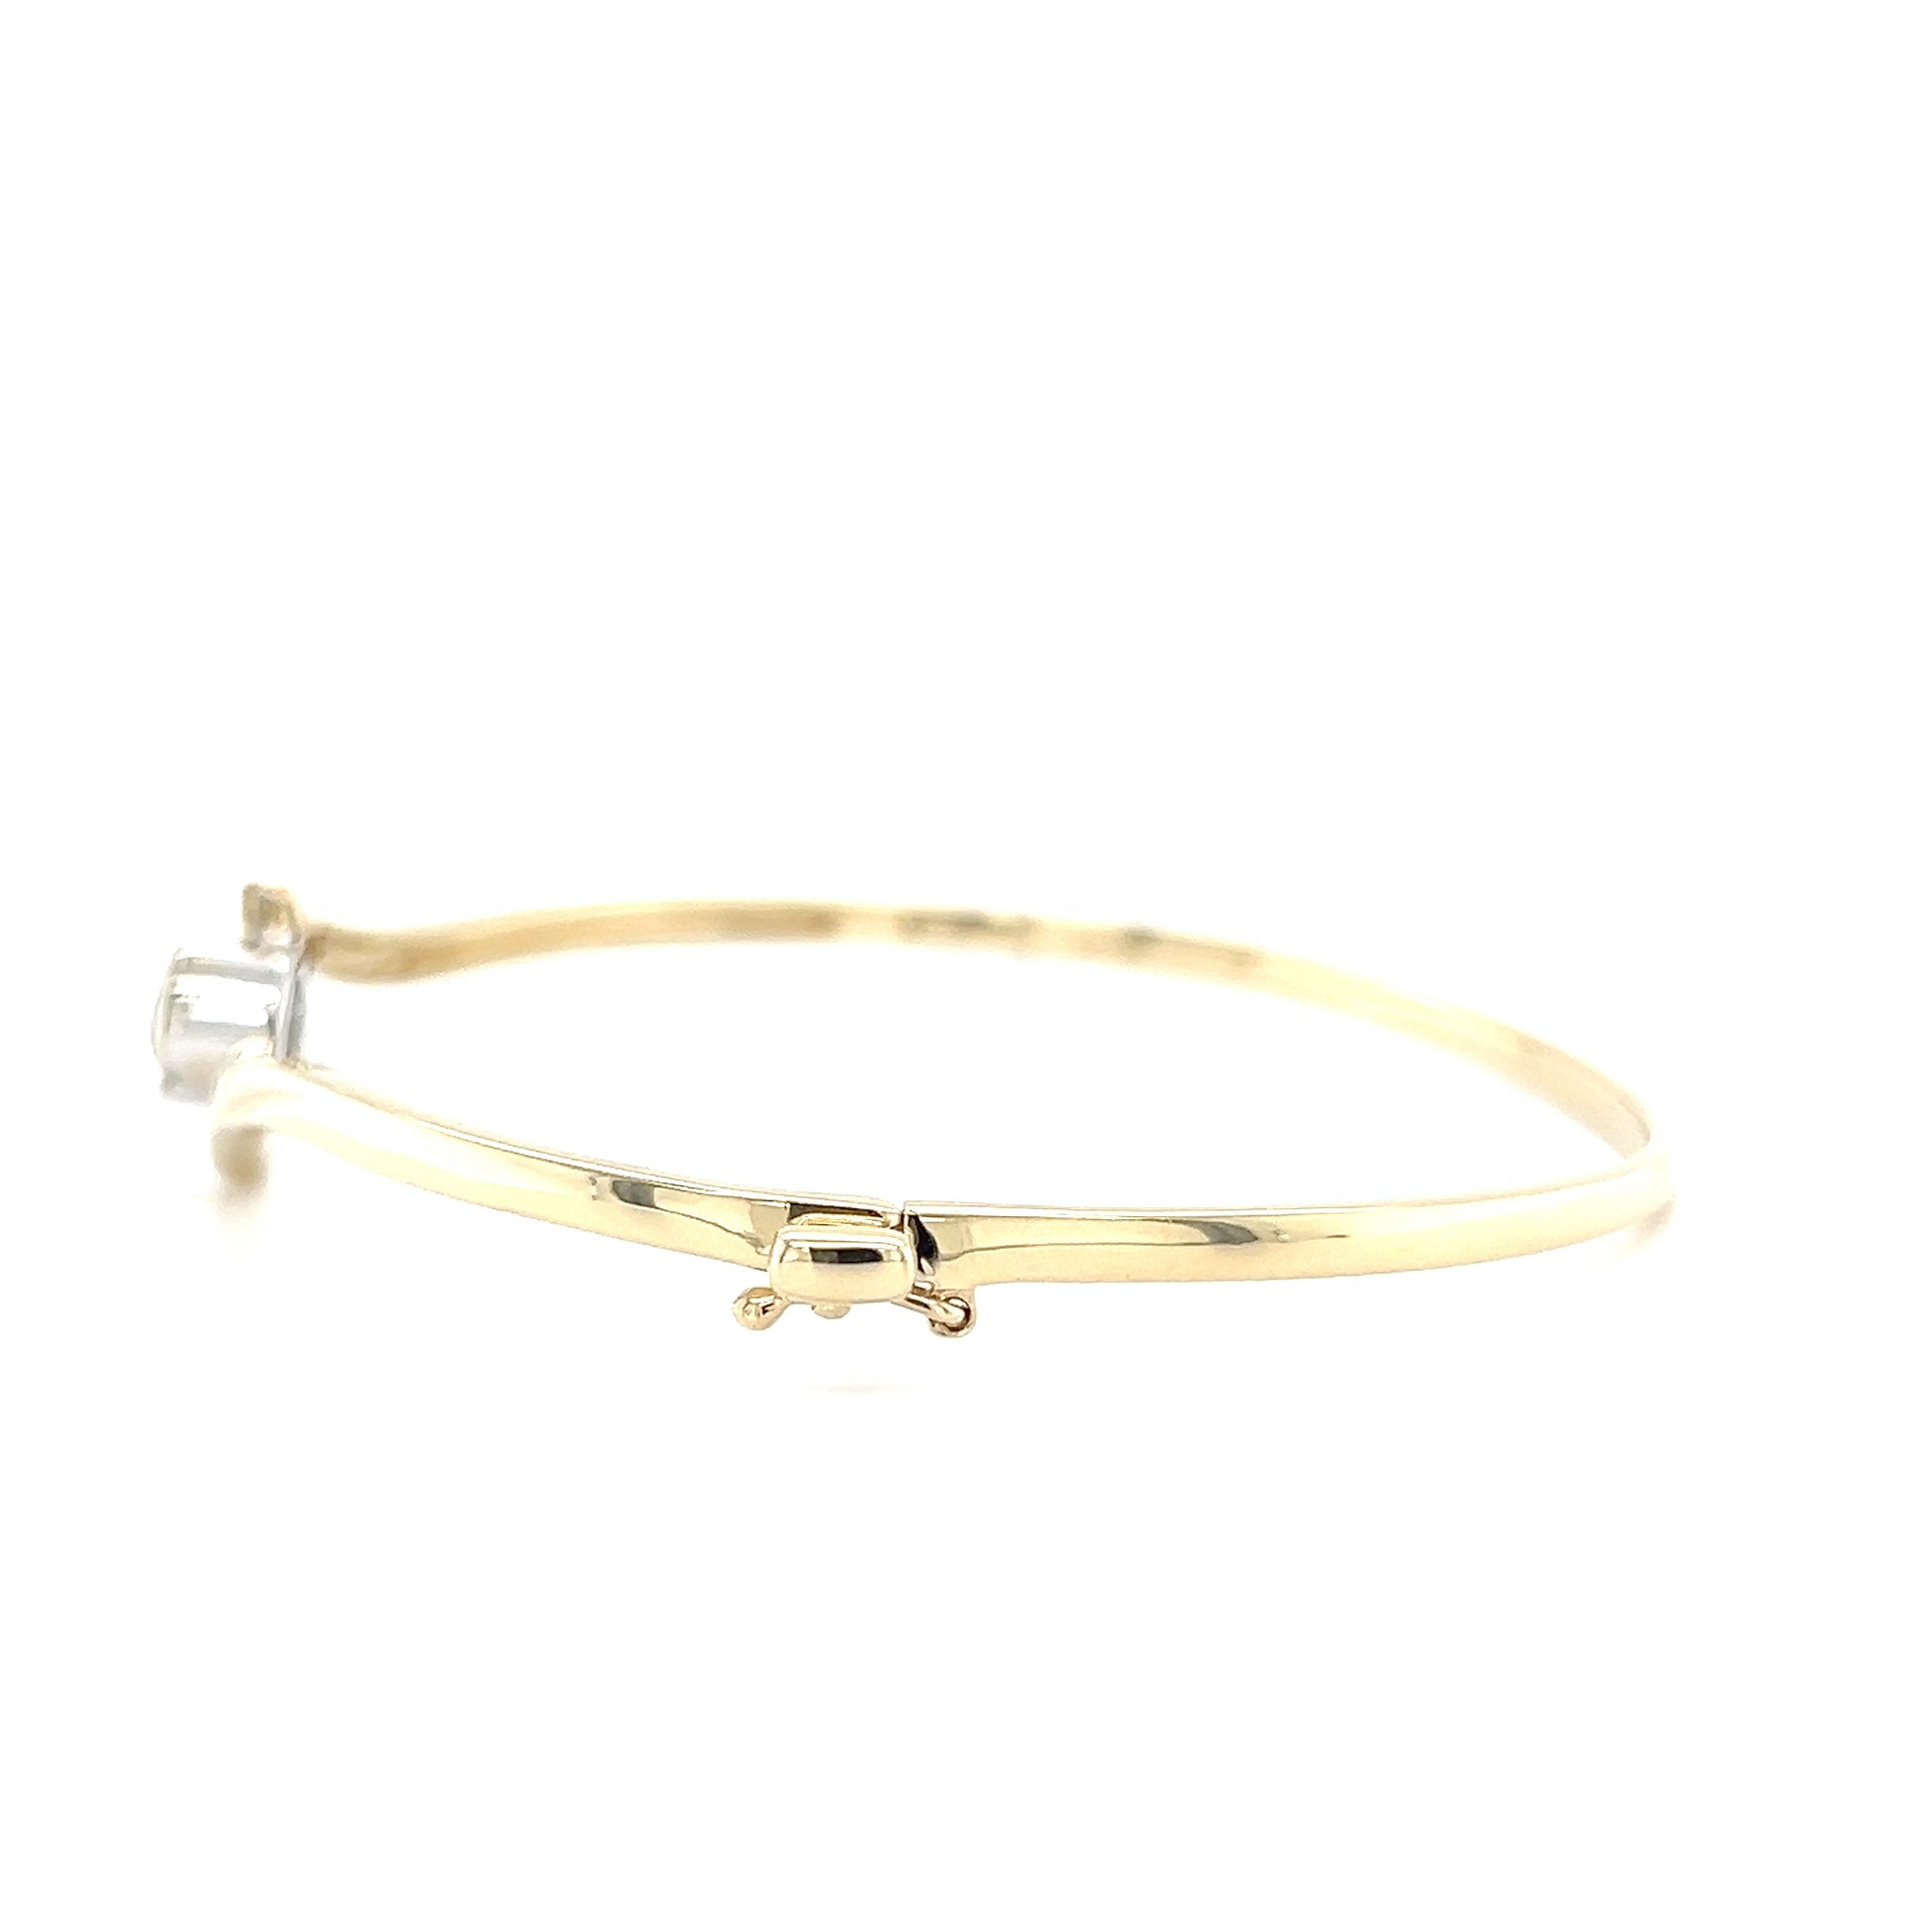 Solid Bypass Bangle Bracelet with 0.5ct of Diamonds in 14K Yellow and White Gold Clasp View